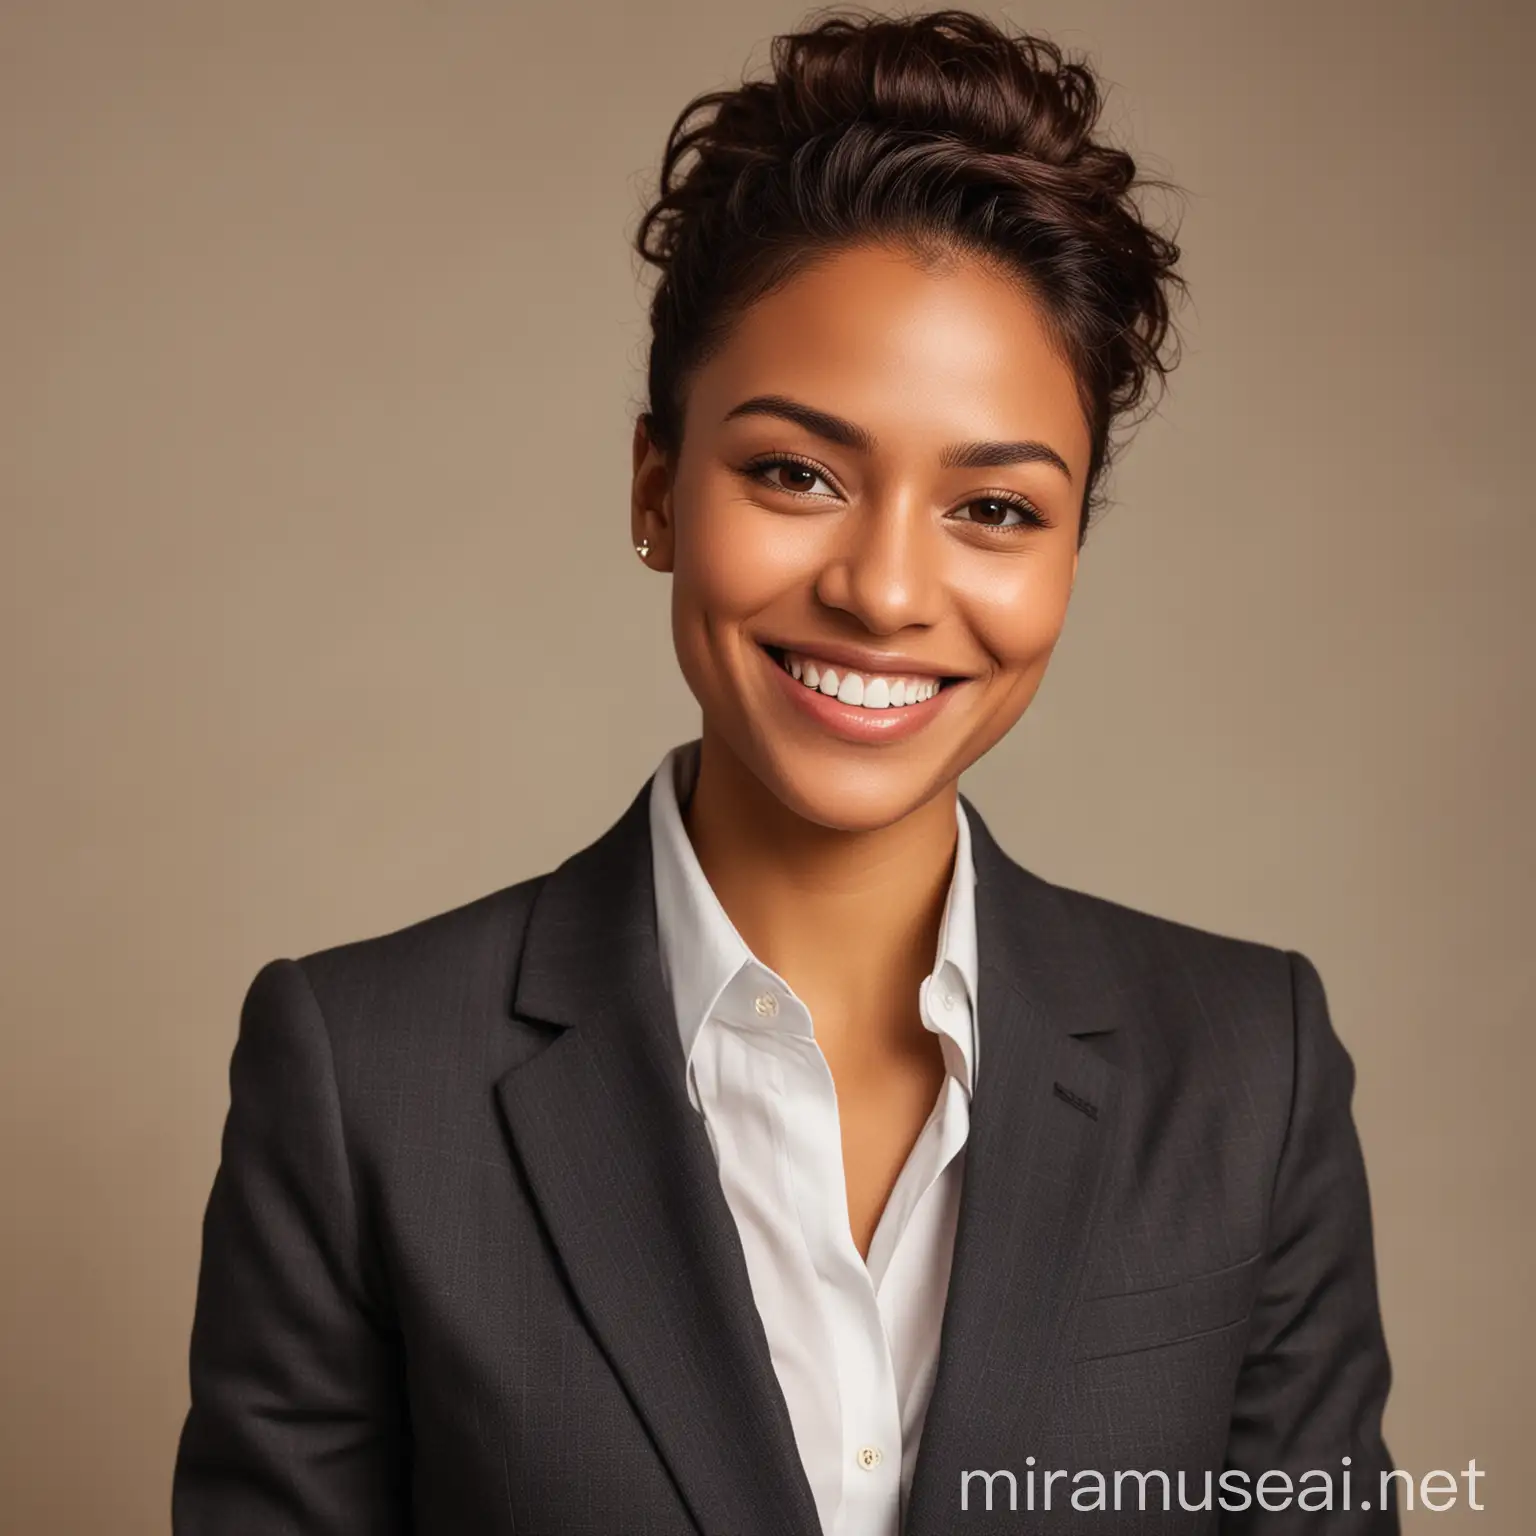 Smiling Professional African American Woman in Business Attire